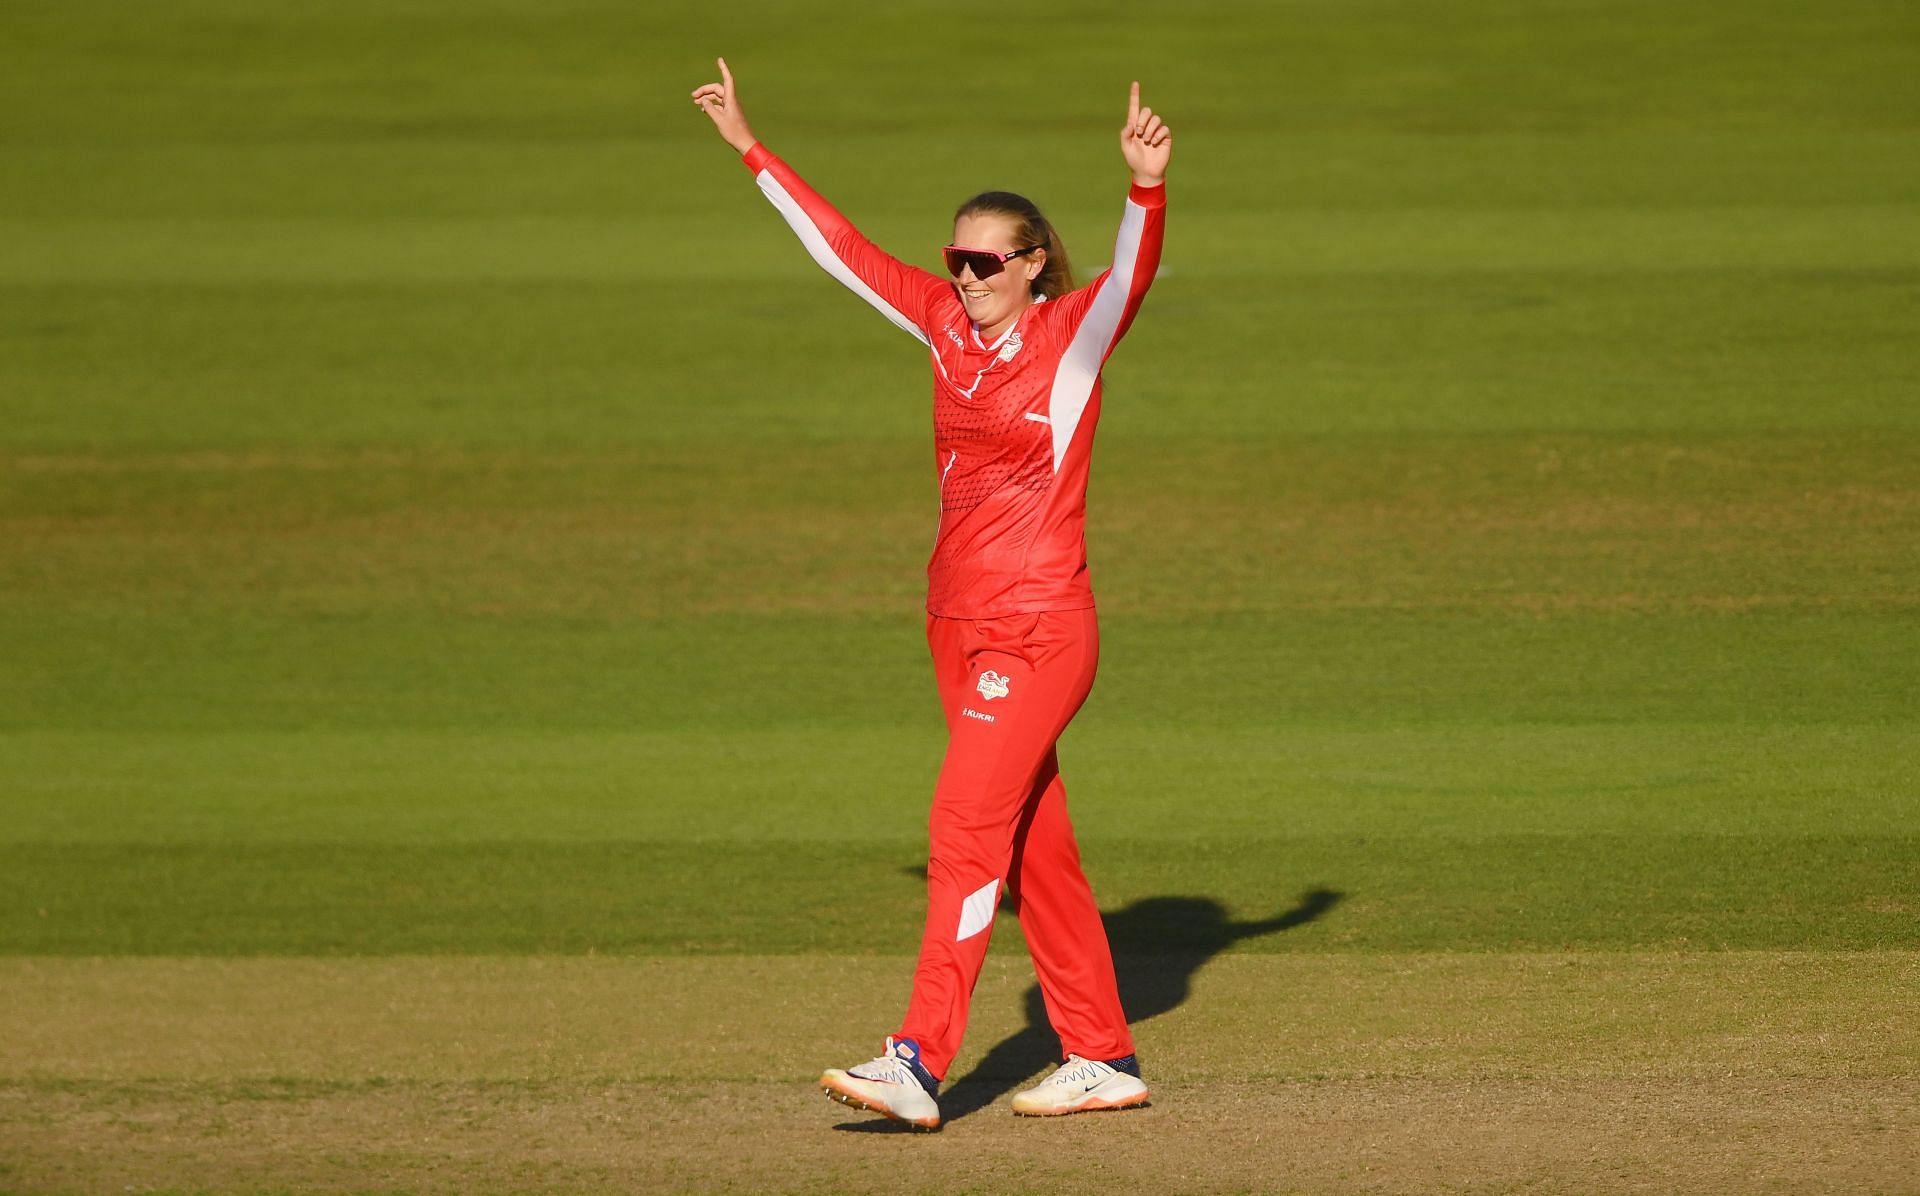 Sophie Ecclestone bagged 5 wickets in 5 matches at the Commonwealth Games 2022.